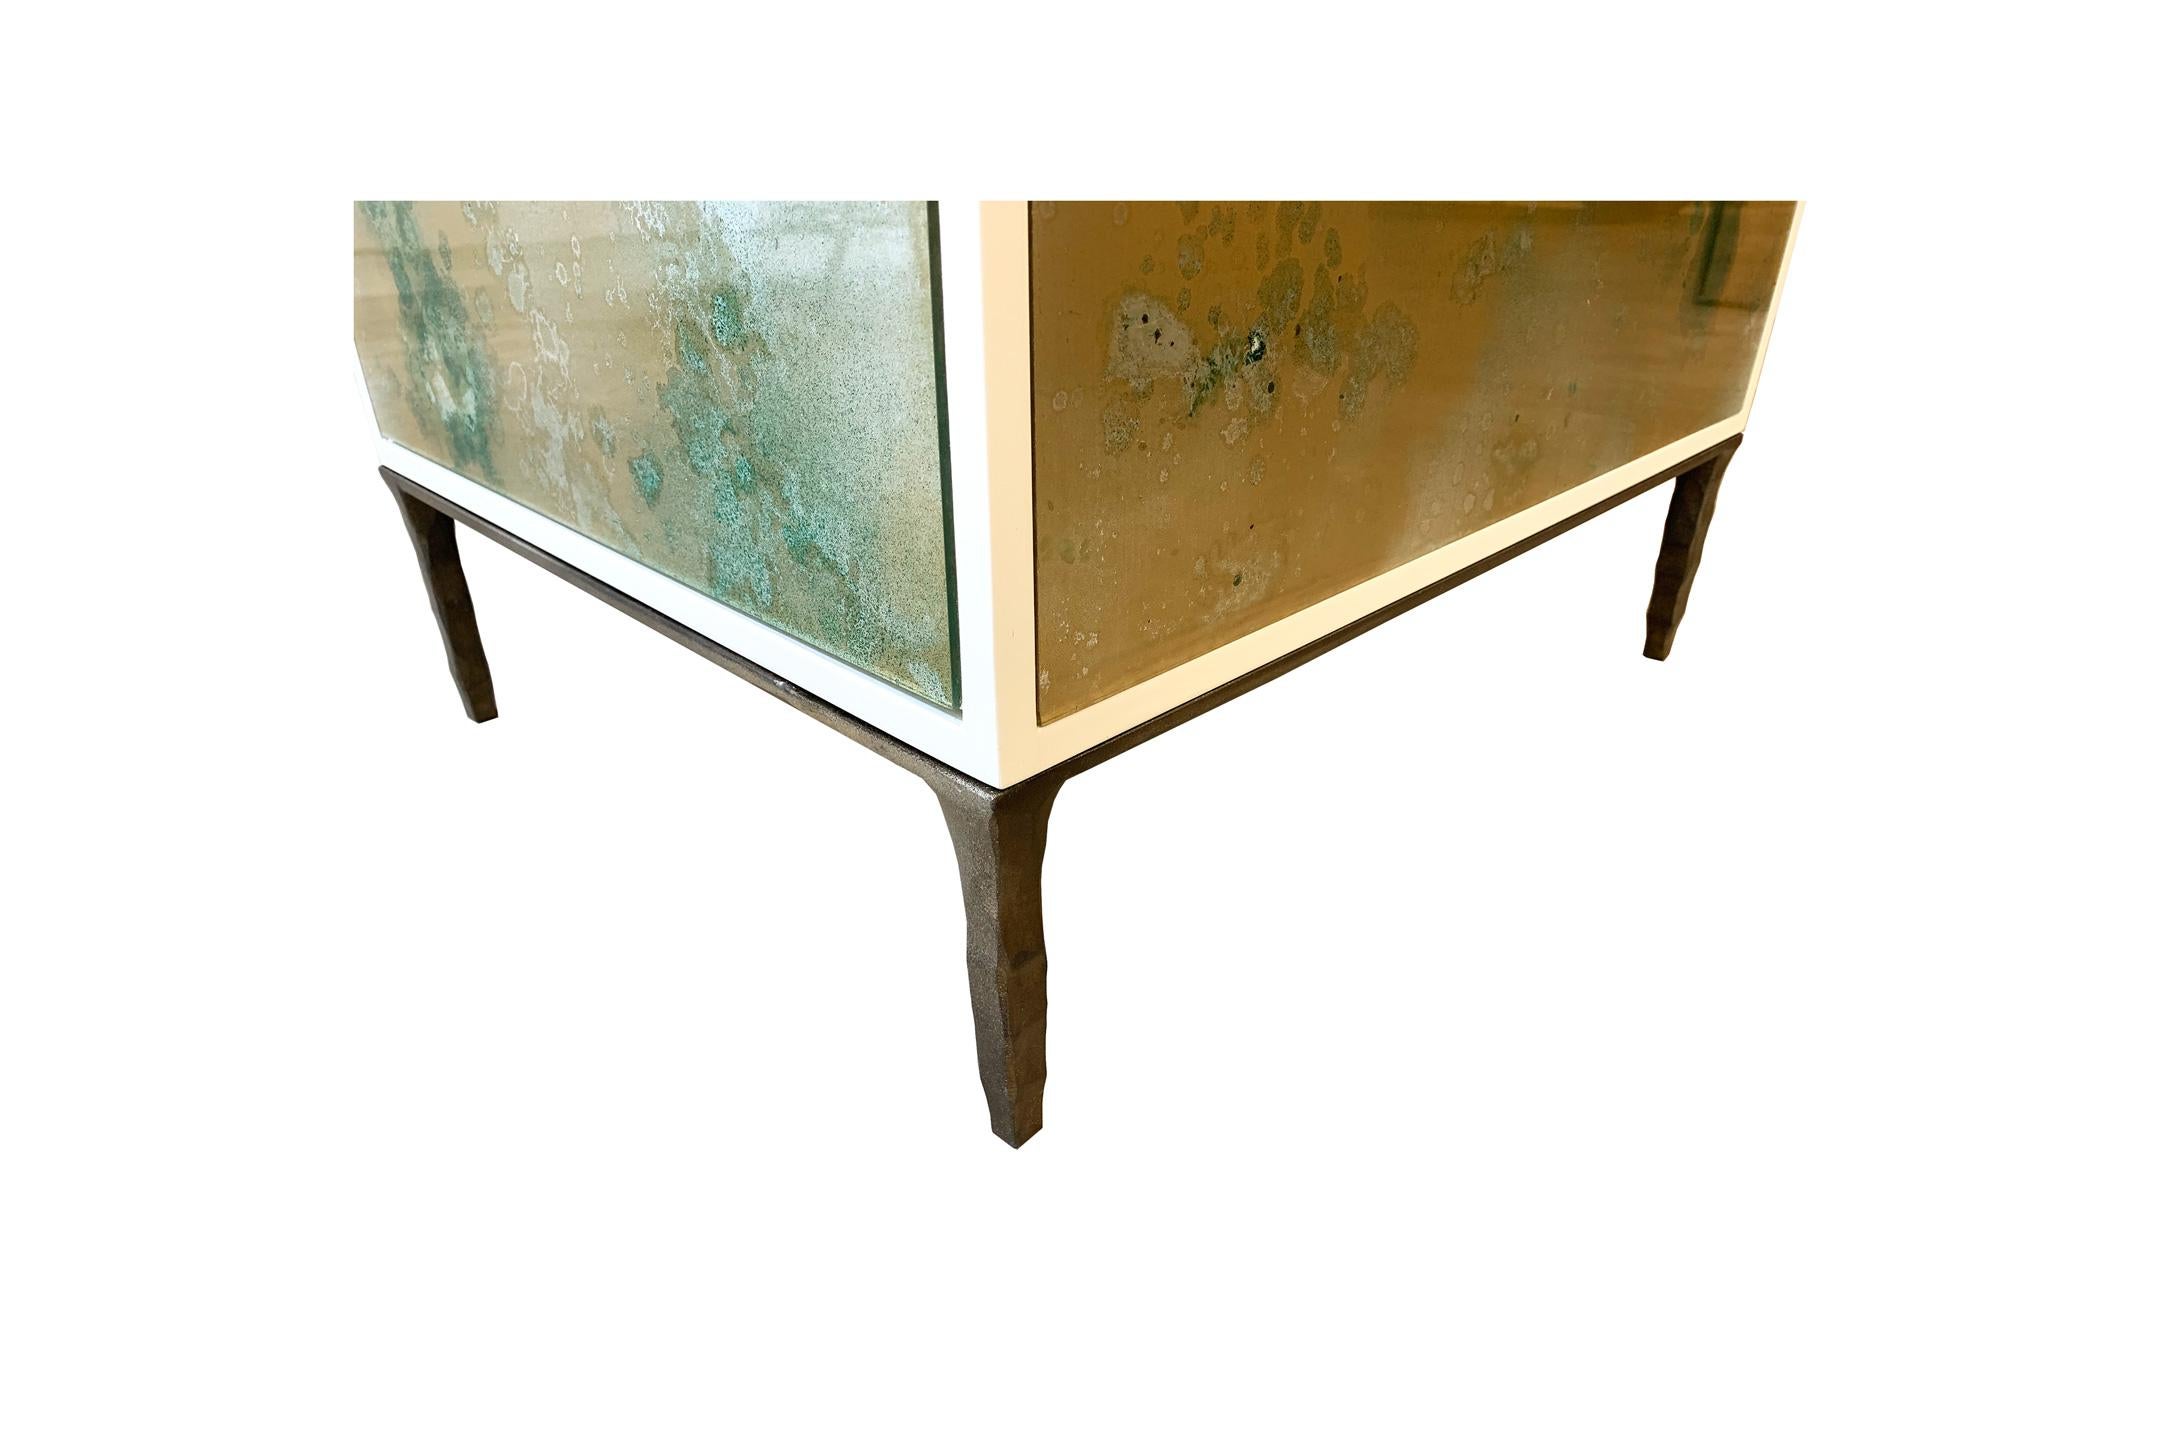 Modern Eglomise Glass Byzantine Gold Vanity and Forged Metal Legs by Ercole Home In New Condition For Sale In Brooklyn, NY